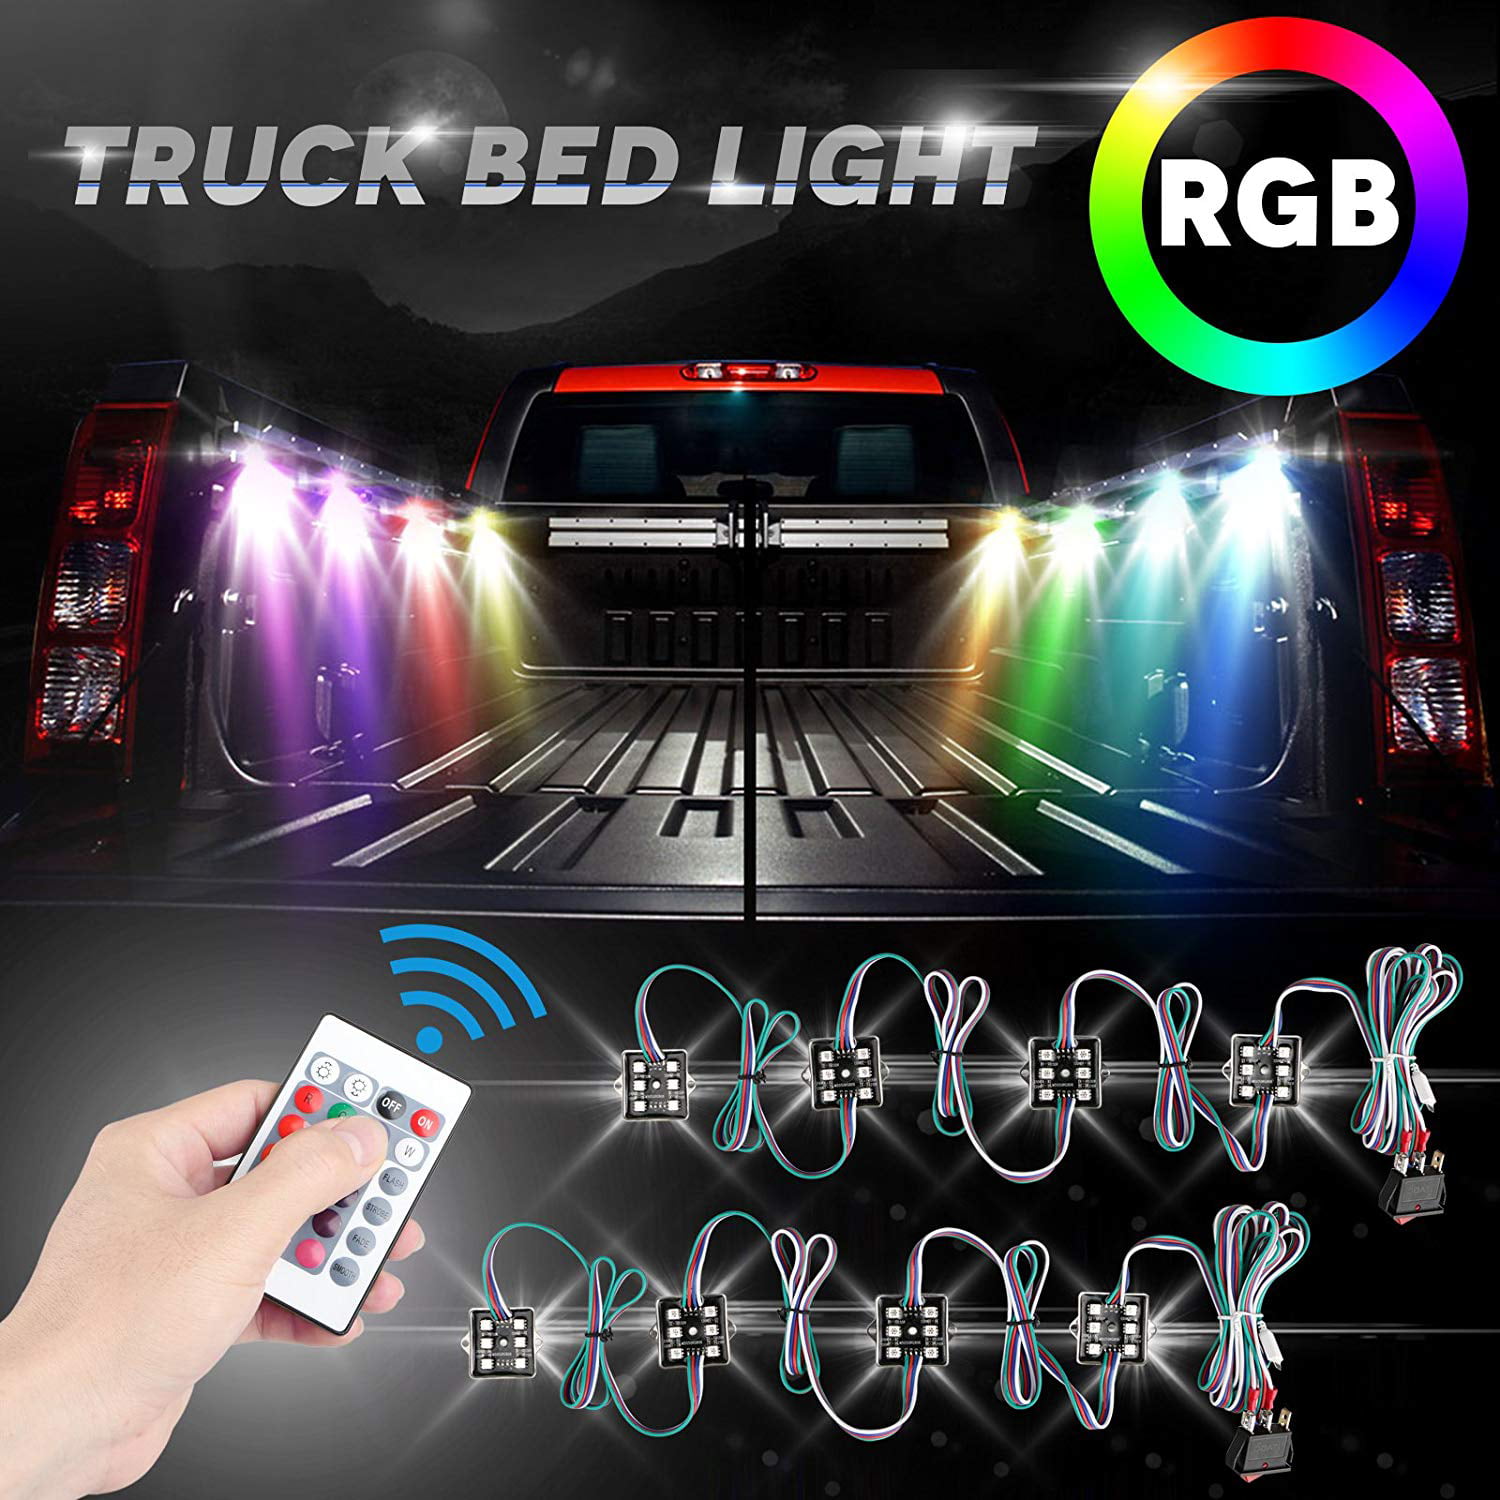 Foot Wells,Side Marker,Rail Light NBWDY 8Pcs RGB Truck Bed LED Light Kit,Waterproof Multi-Color 32 LED Pickup Cargo Rock Lighting Kits with w/Switch Wireless Remote Control for Off Road Under Car 